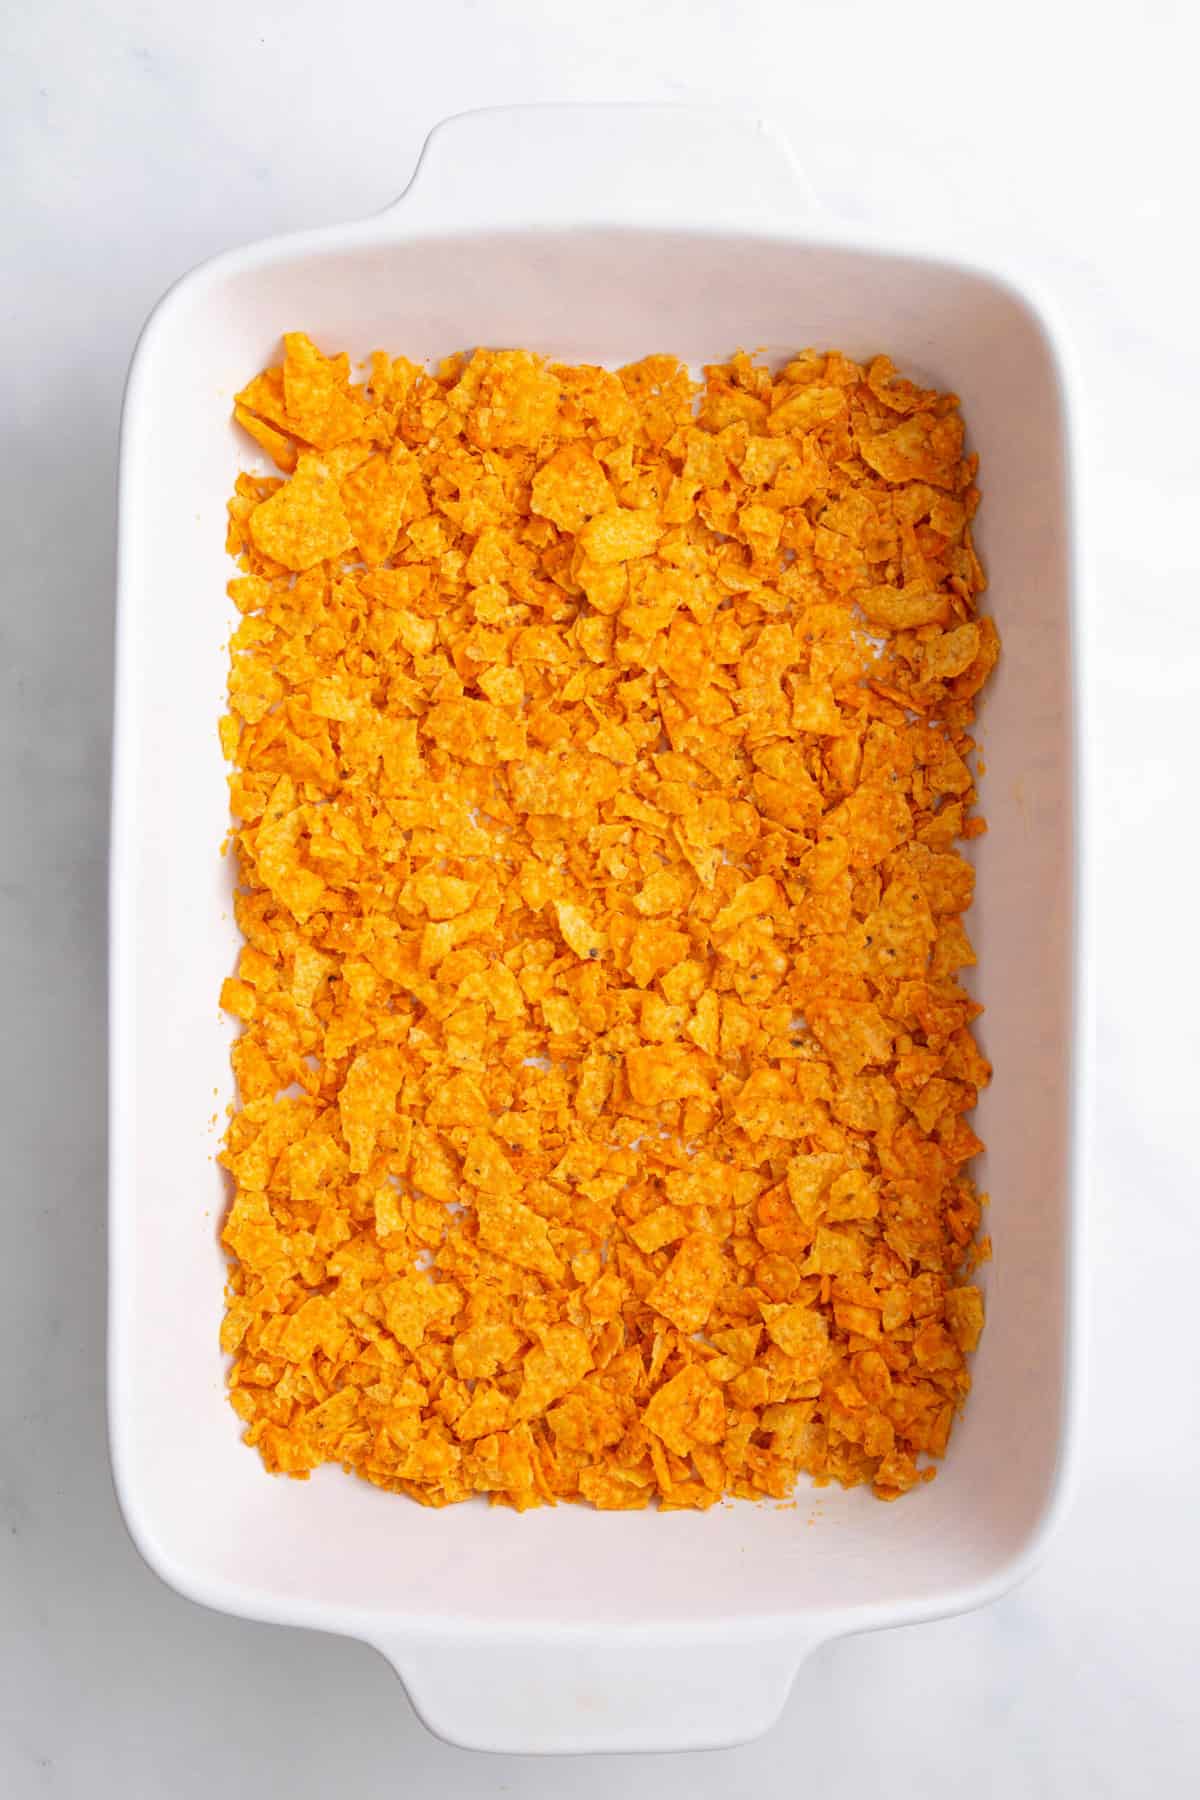 step 1 to make dorito chicken casserole, layer crushed Doritos chips on the bottom of a 9x13 inch casserole dish